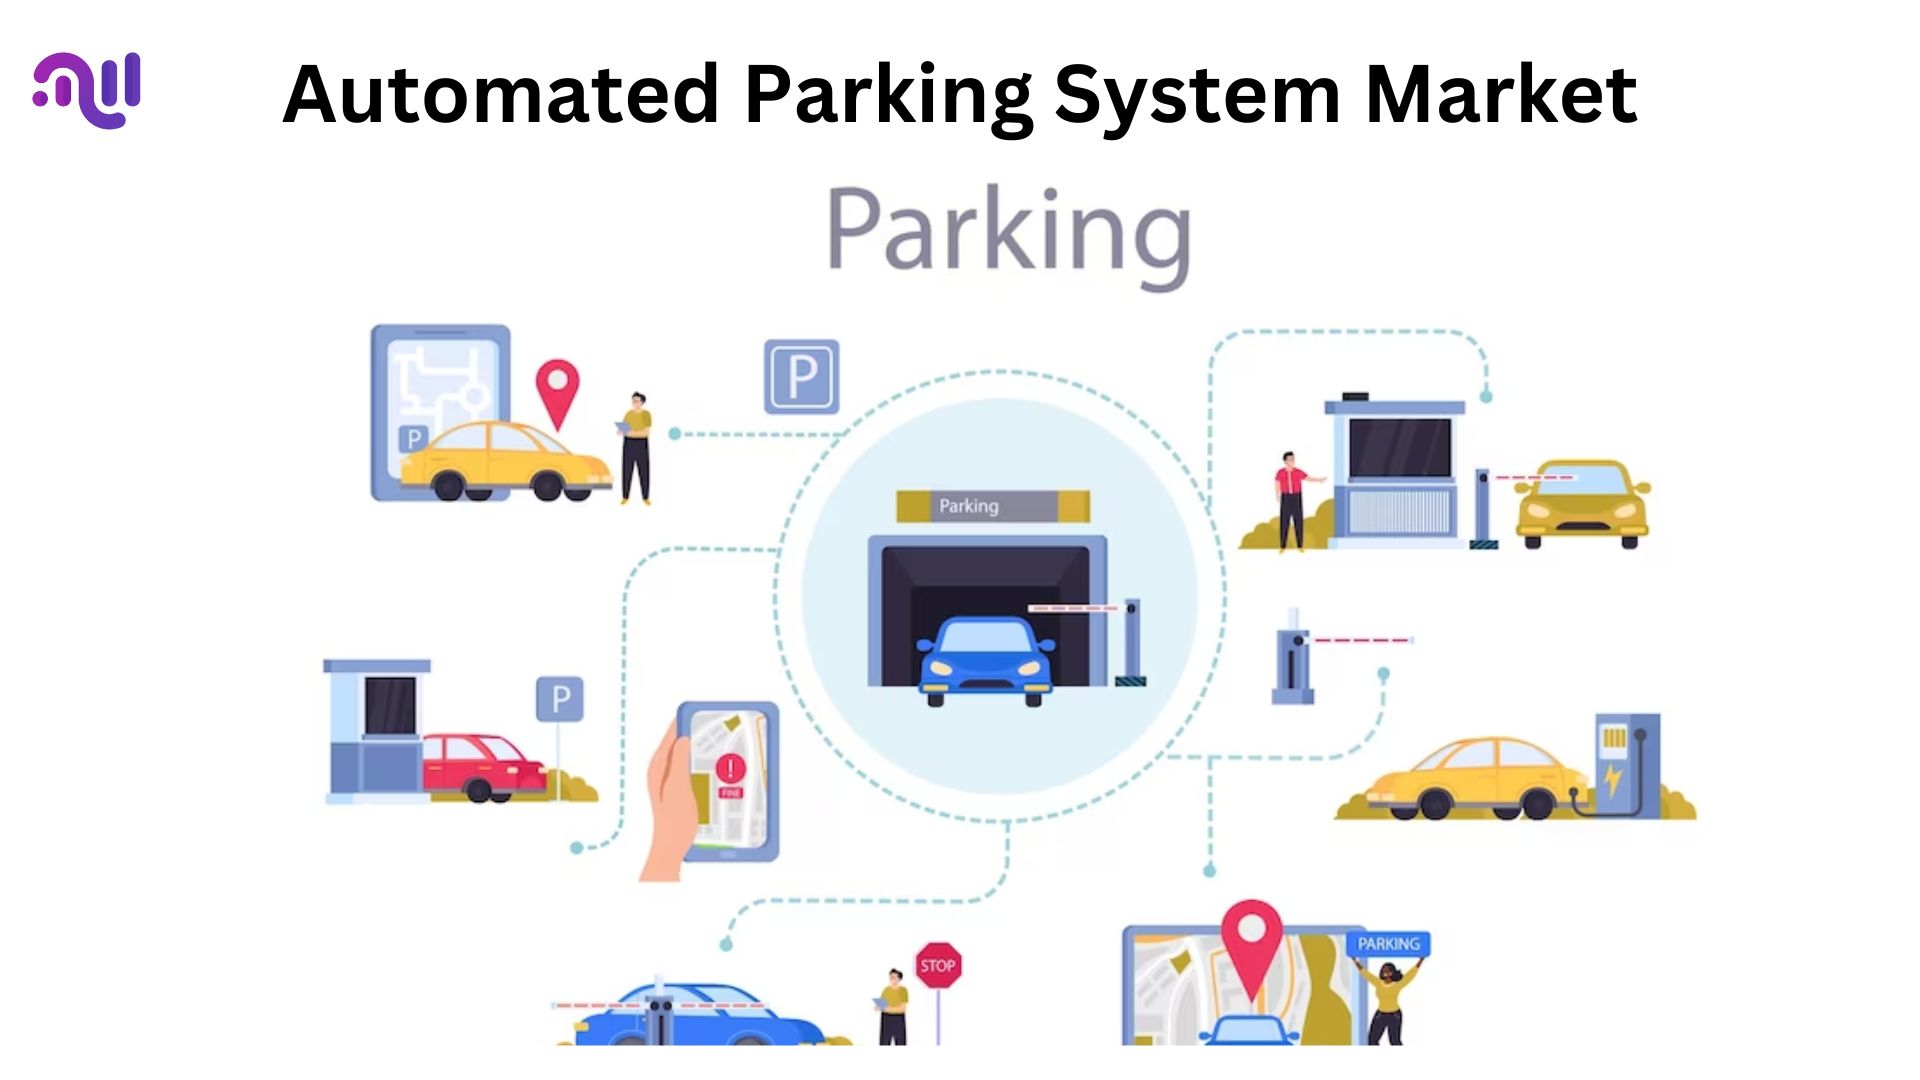 Automated Parking System Market Growing At A CAGR of 11.4%